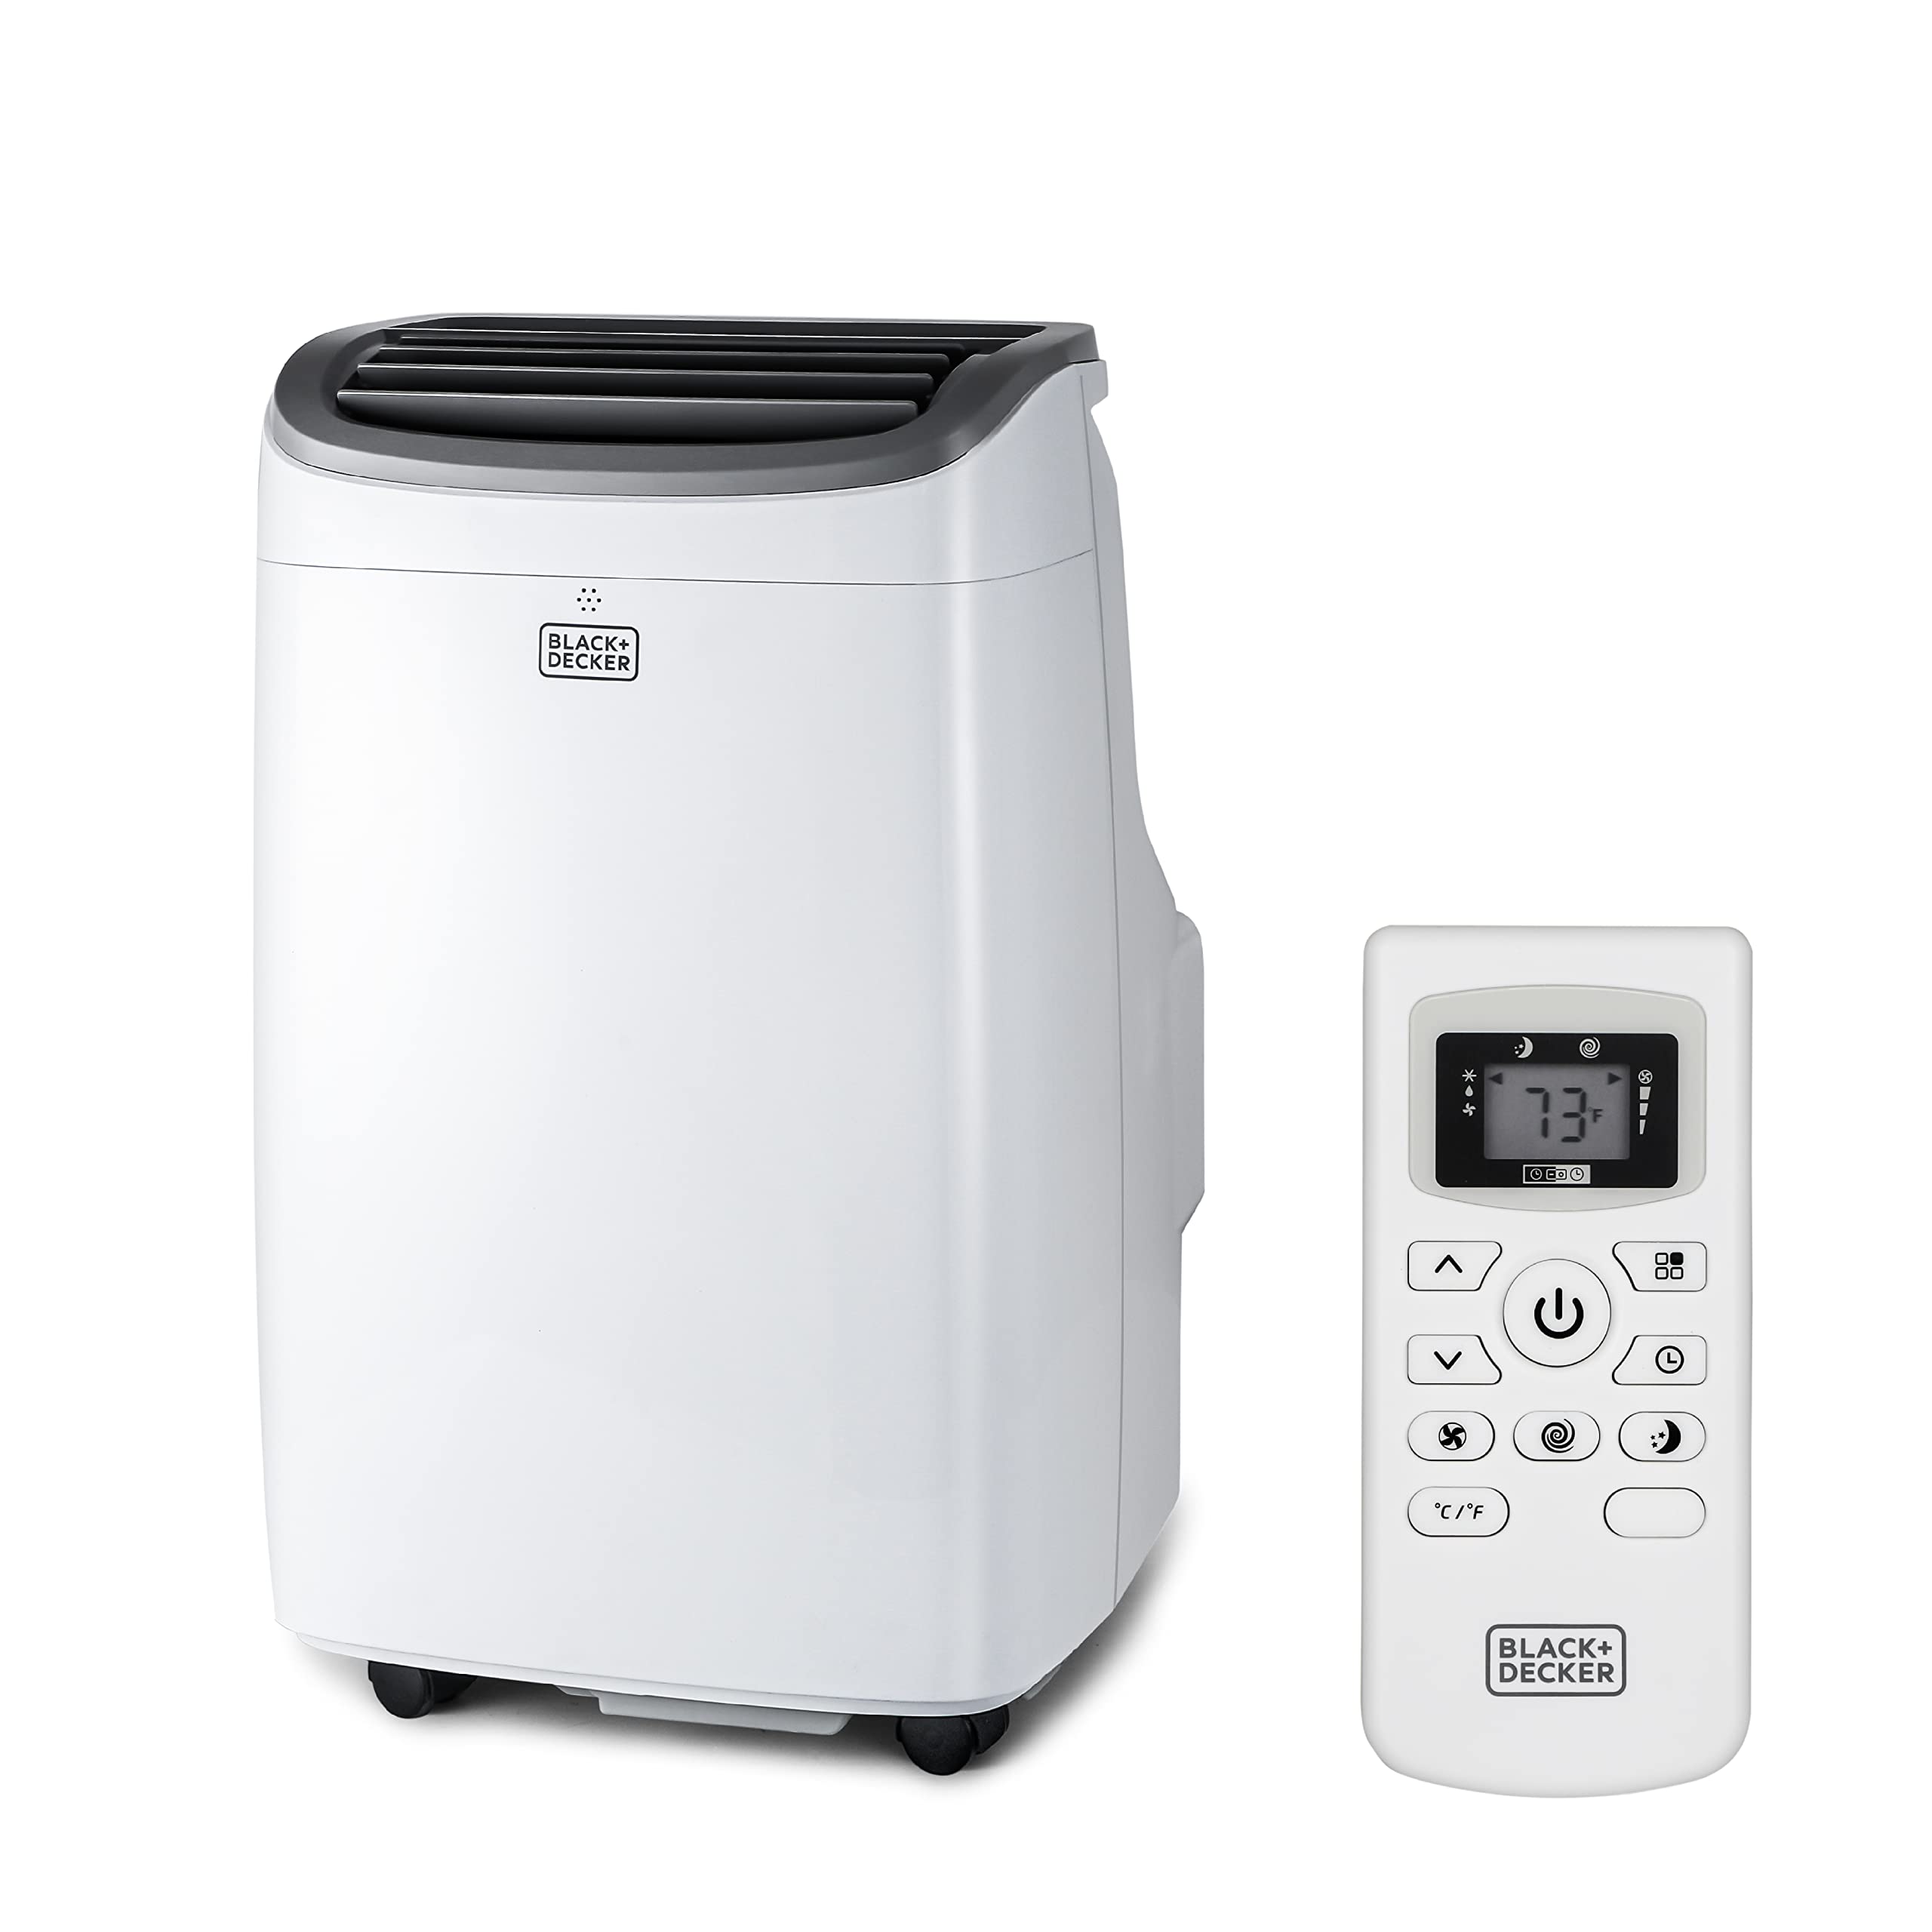 BLACK+DECKER 8,000 BTU Portable Air Conditioner up to 350 Sq. with Remote Control, White best patio air conditioner